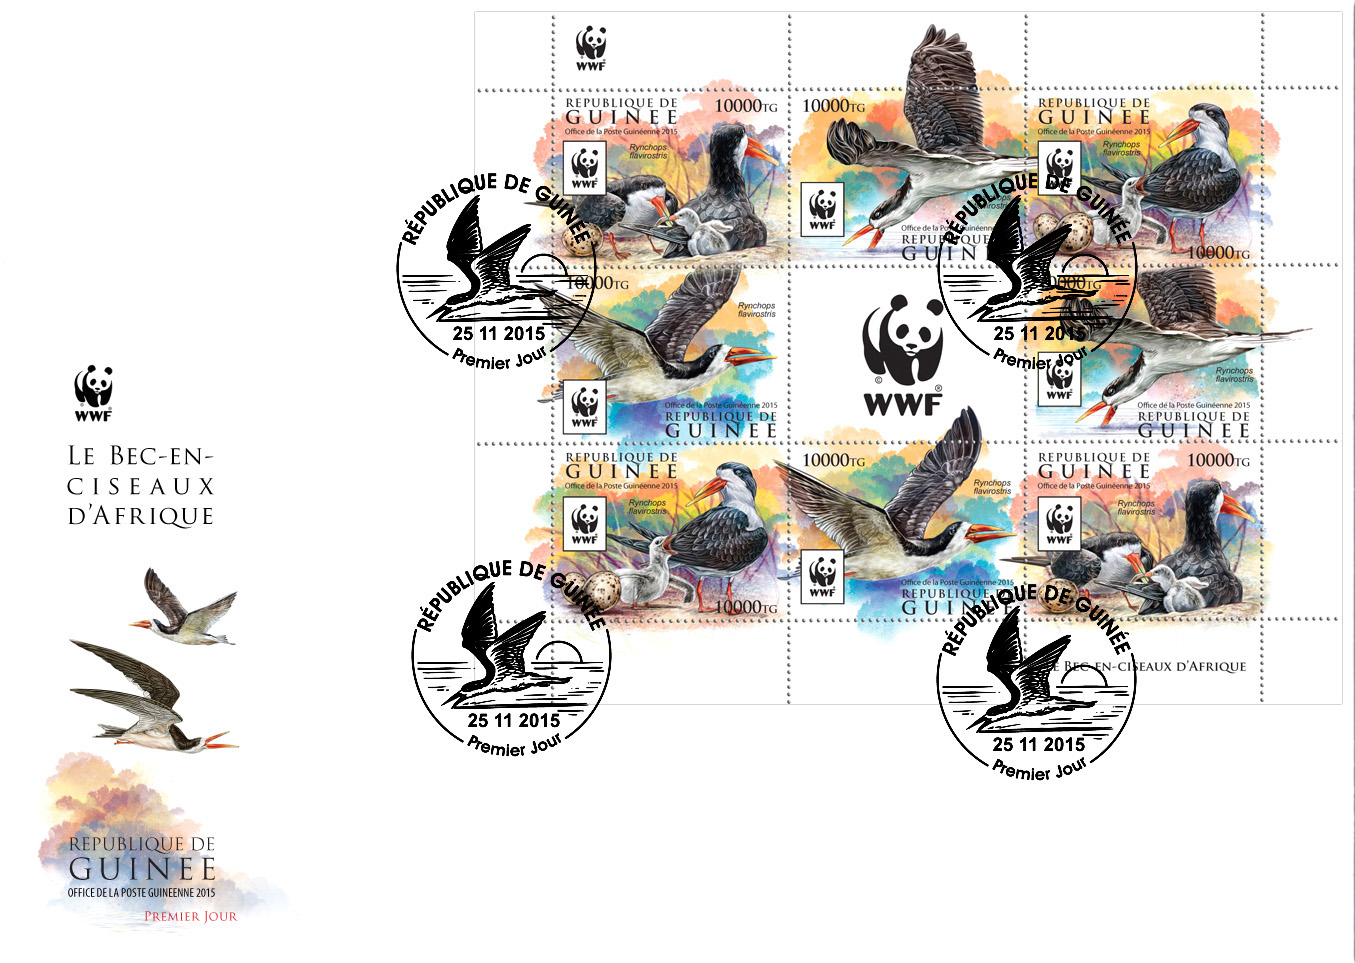 WWF – Skimmer (FDC) - Issue of Guinée postage stamps